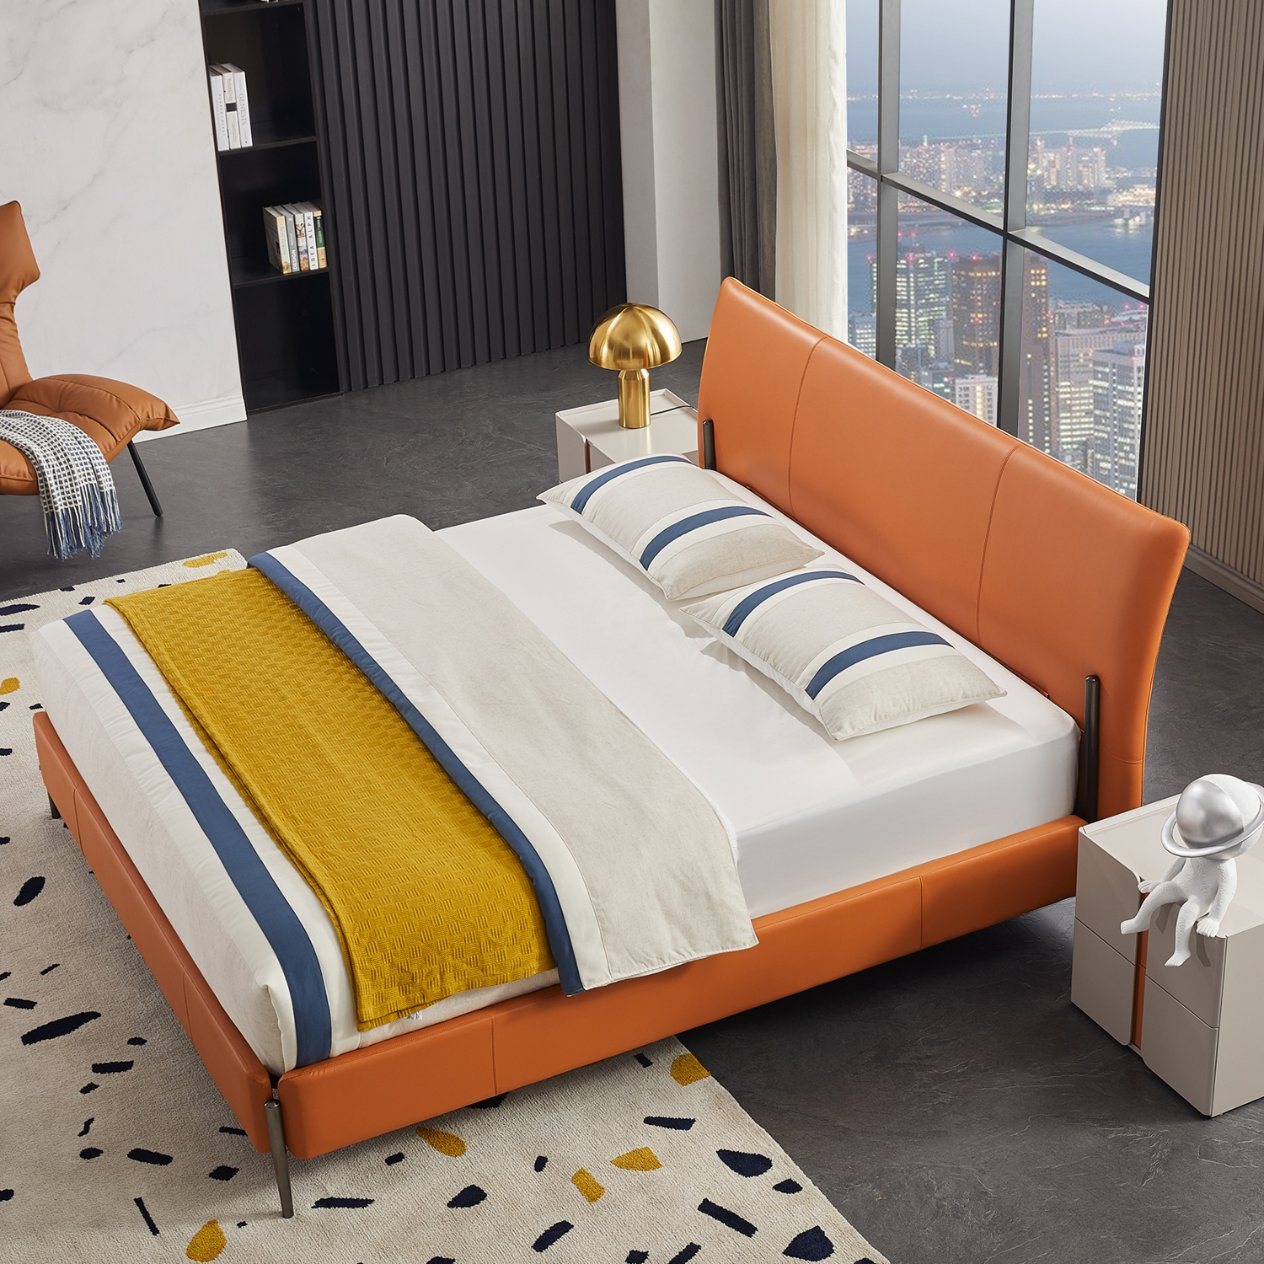 Modern Customized Bedroom Leather Double Queen King Bed